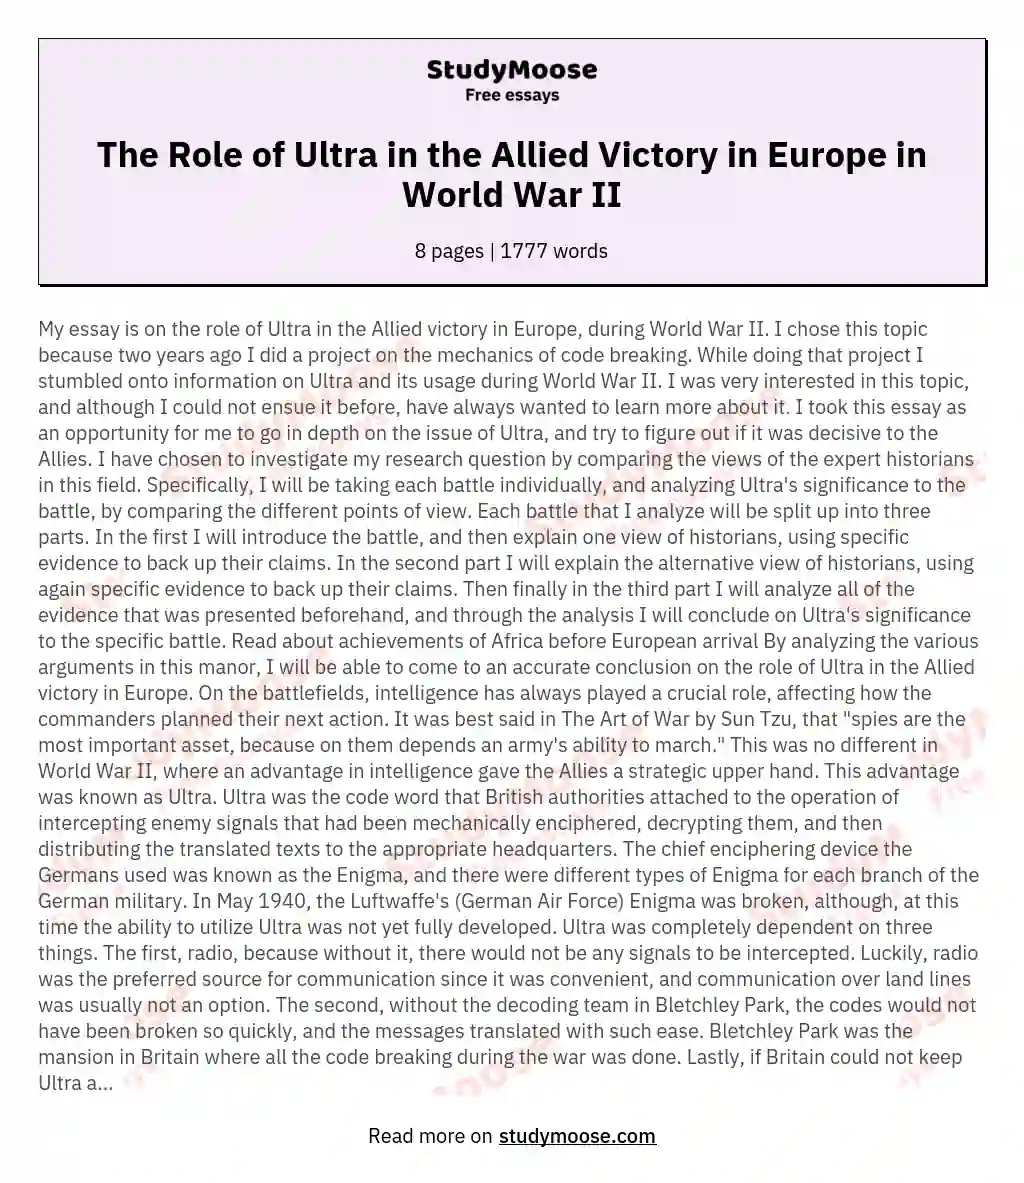 The Role of Ultra in the Allied Victory in Europe in World War II essay